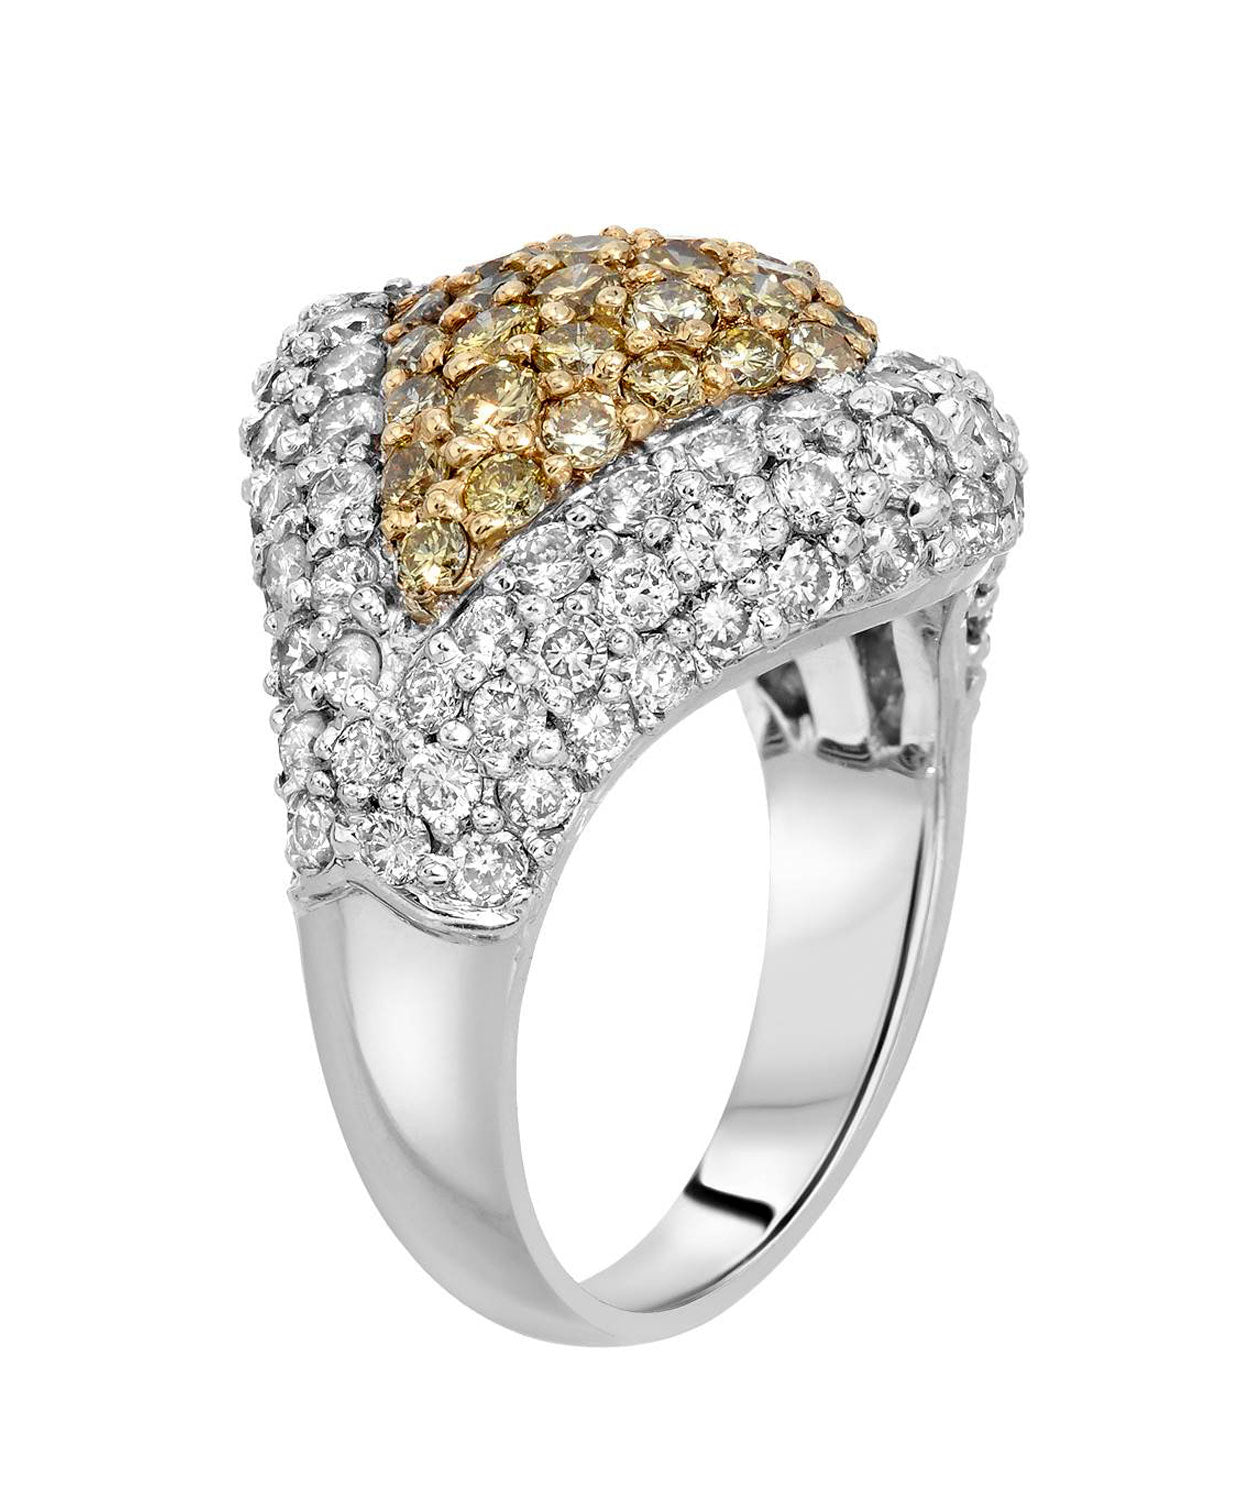 Glamour Toujours Collection 3.51 ctw Fancy Yellow and White Diamond 14k Gold Right Hand Ring View 2